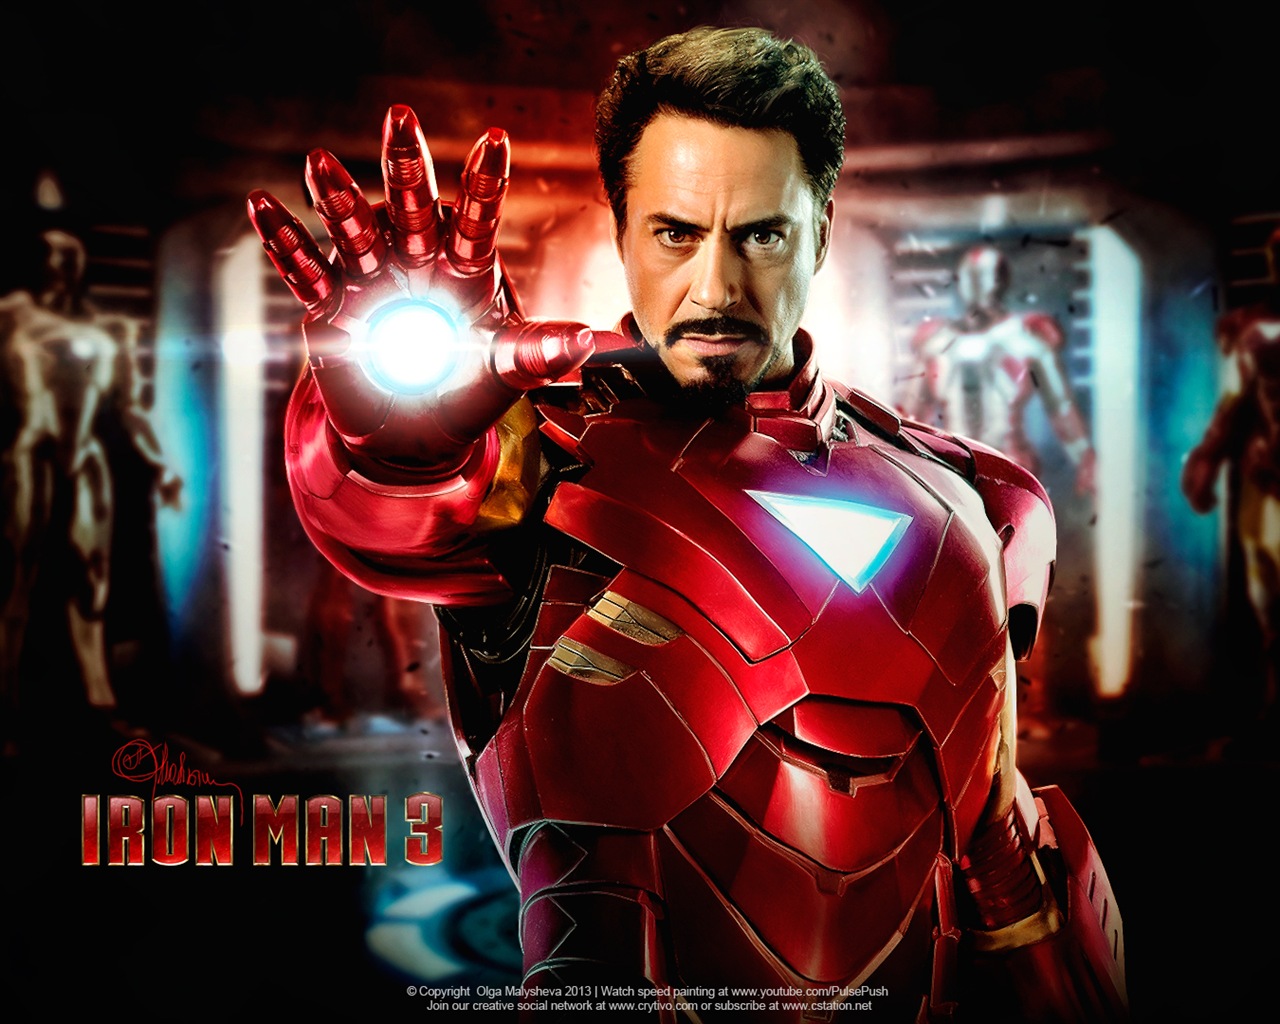 2013 Iron Man 3 newest HD wallpapers #11 - 1280x1024